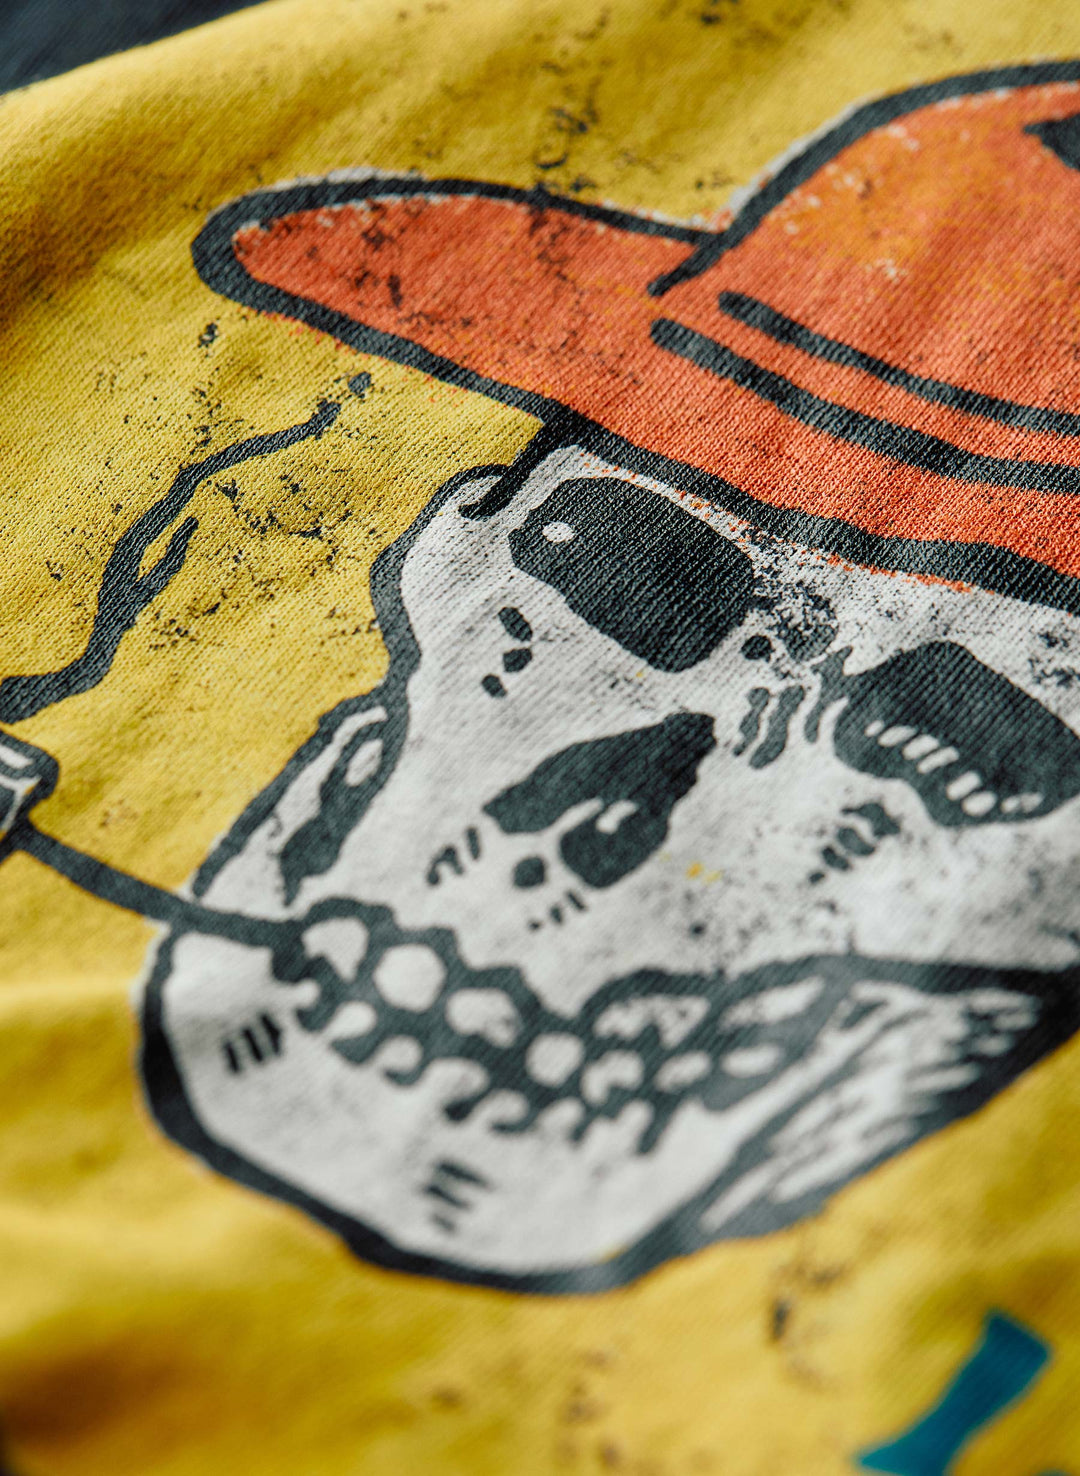 a skull on a yellow shirt